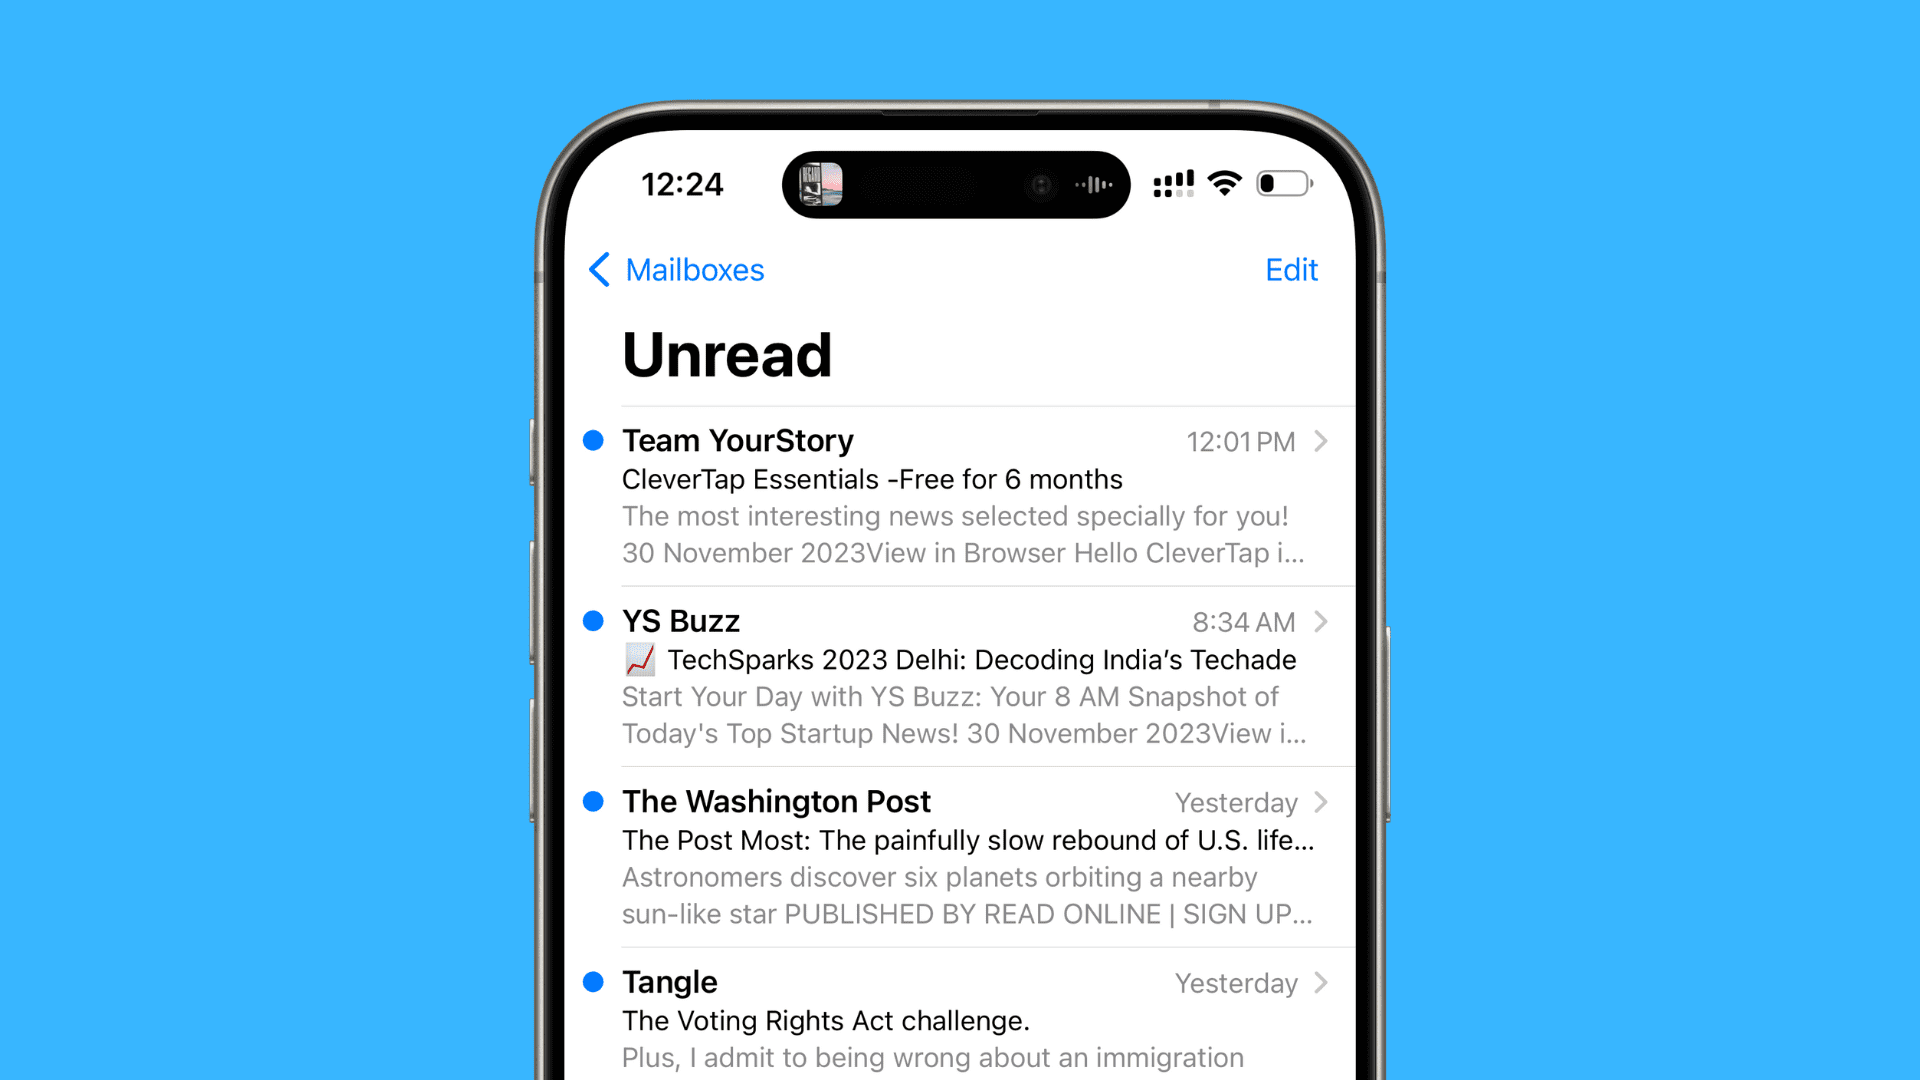 Unread emails in Mail app on iPhone